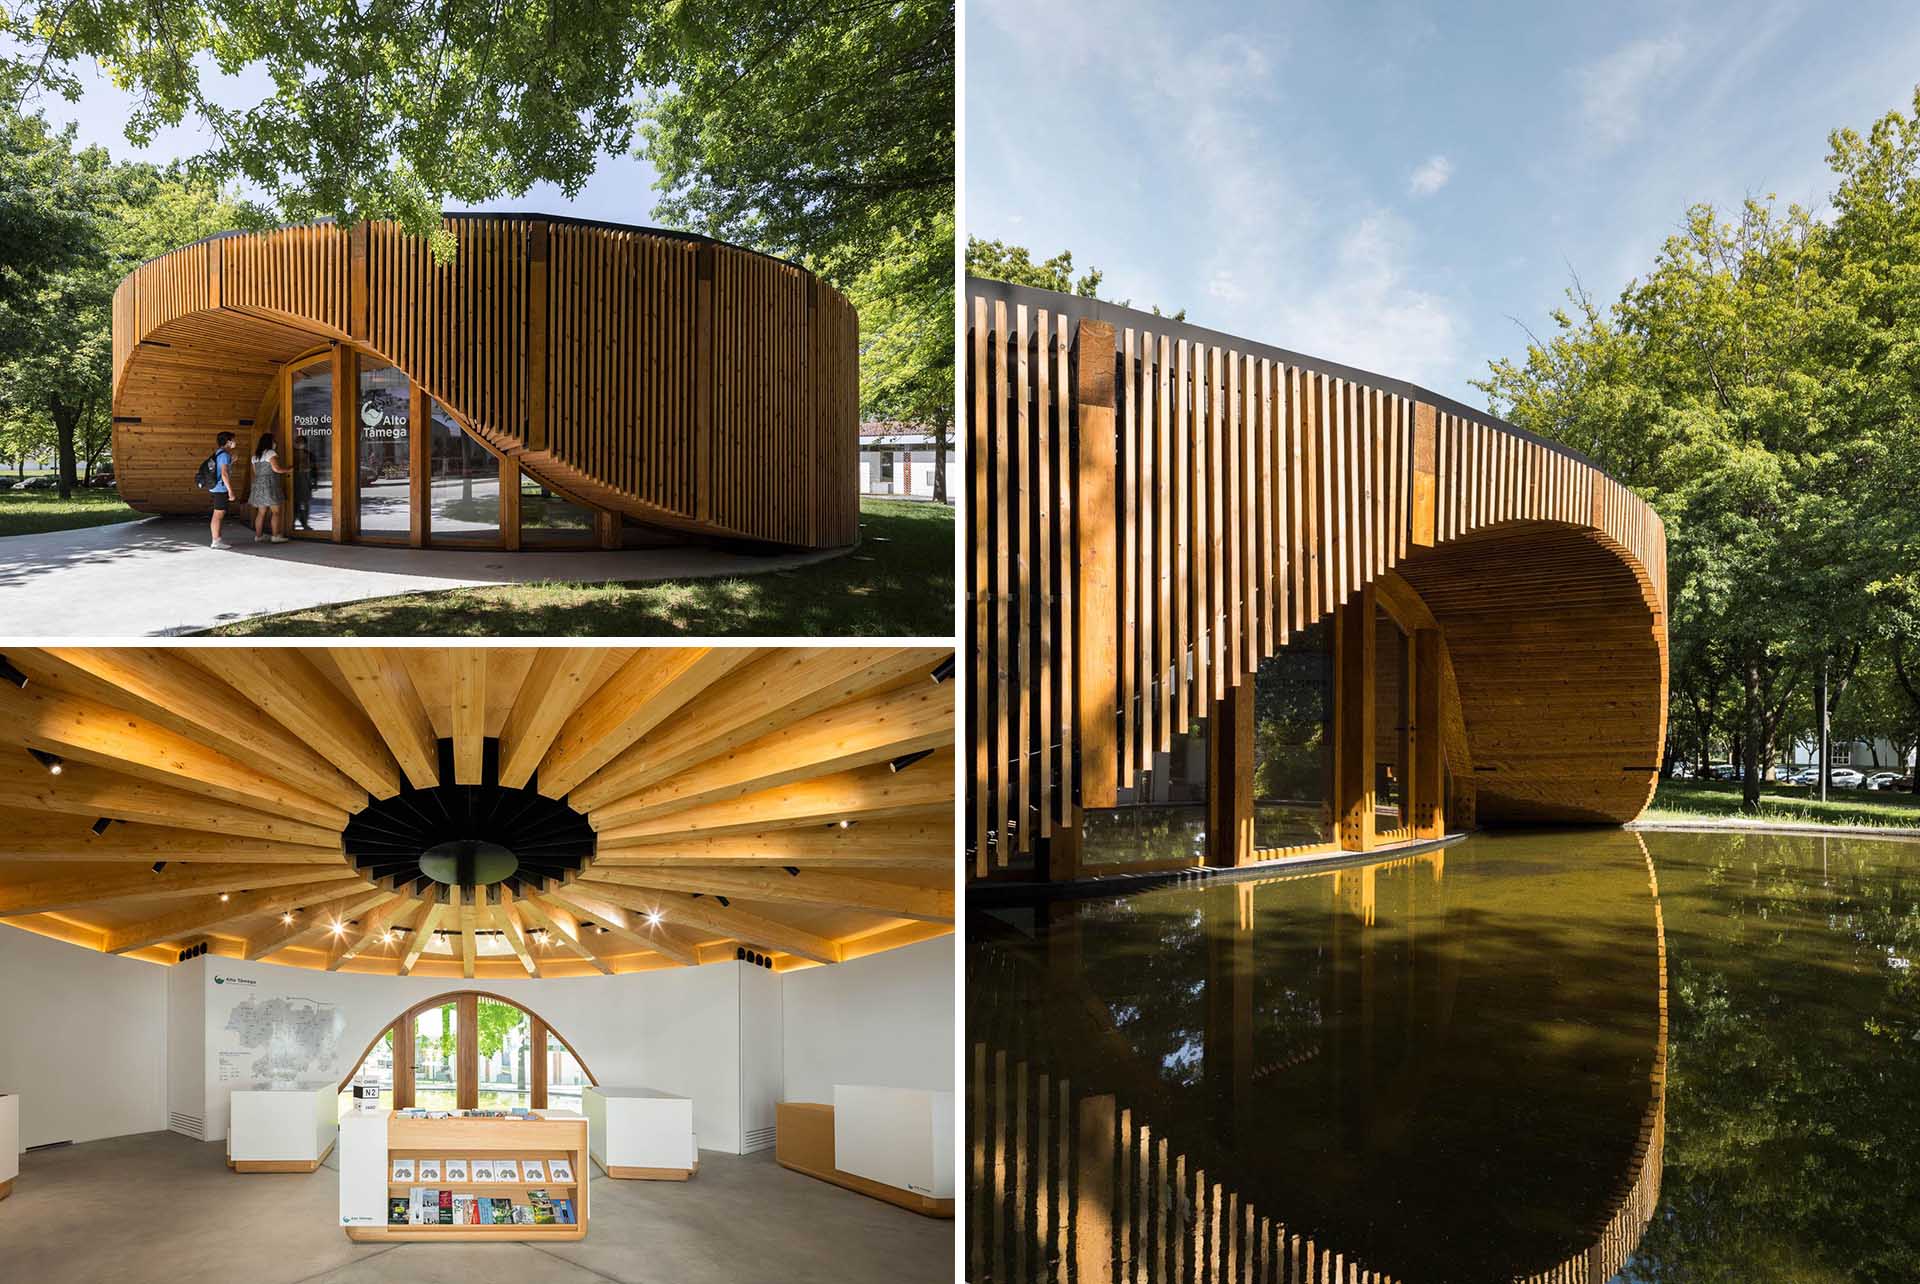 A small modern building has a circular design that's built using a structural base of timber pillars and beams over a concrete slab.